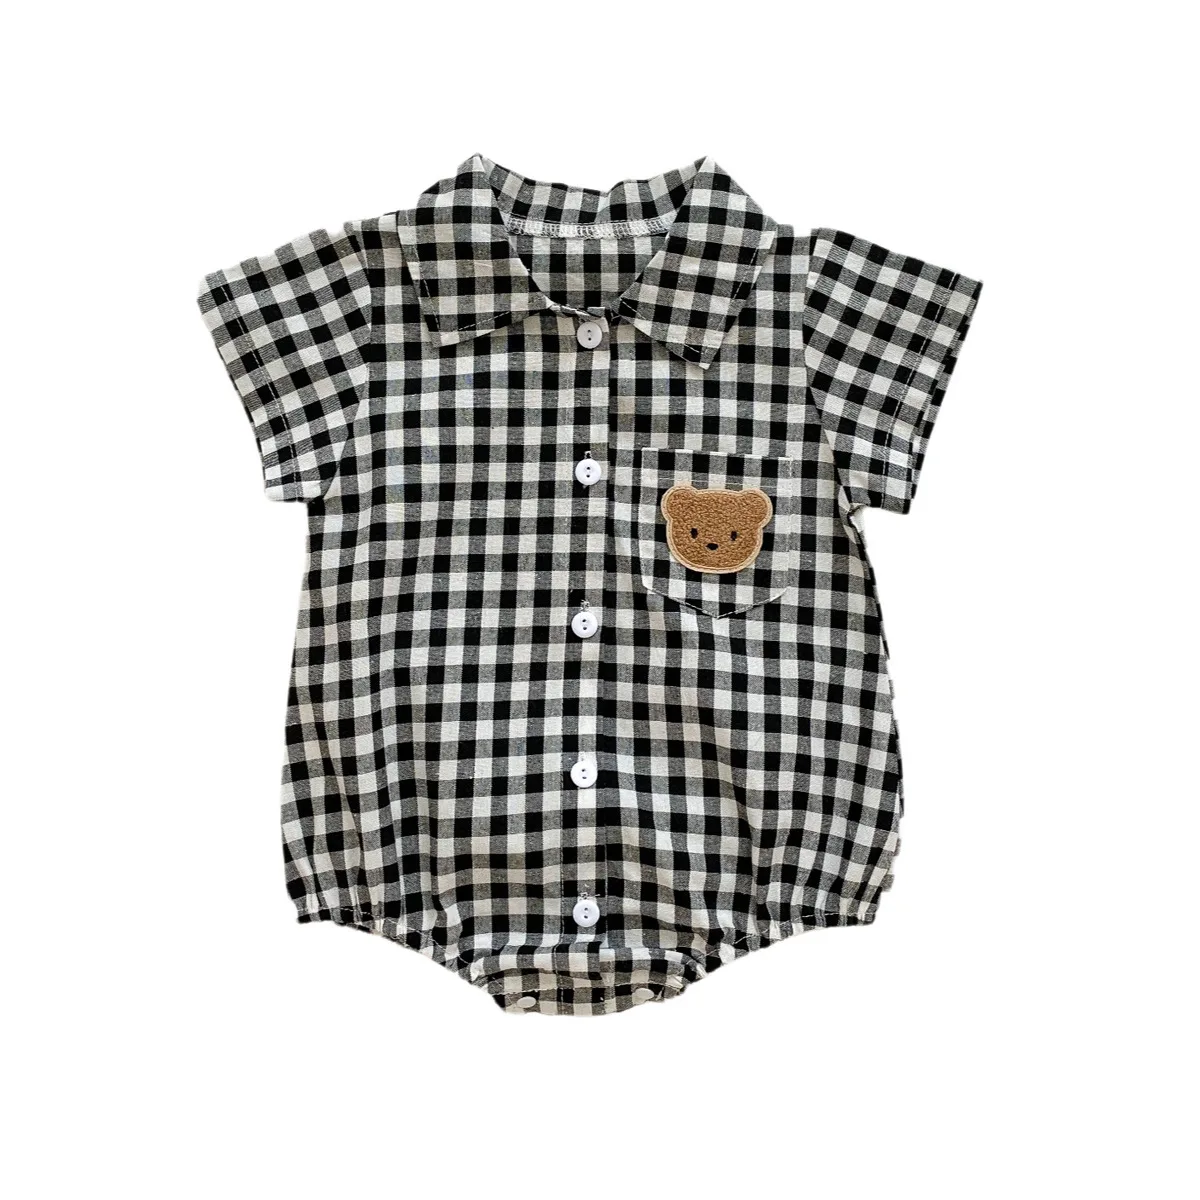 Cute jumpsuits kids Baby Clothing BodySuits Summer Short Sleeve Plaid Embroidery Bear Outfits Infant Kids Handsome Boy Suit